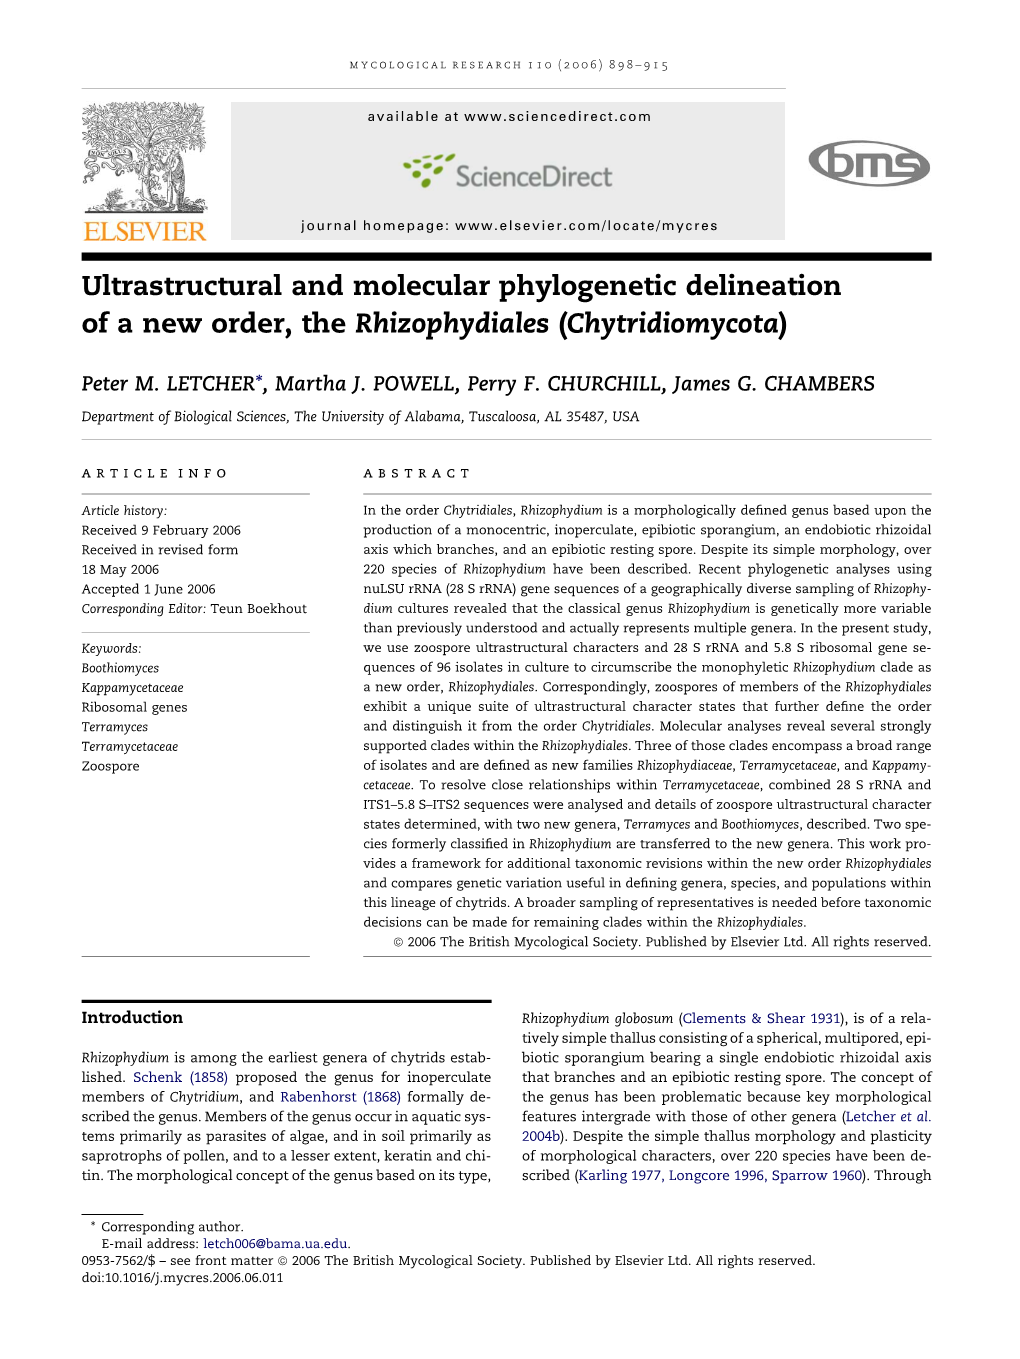 Ultrastructural and Molecular Phylogenetic Delineation of a New Order, the Rhizophydiales (Chytridiomycota)